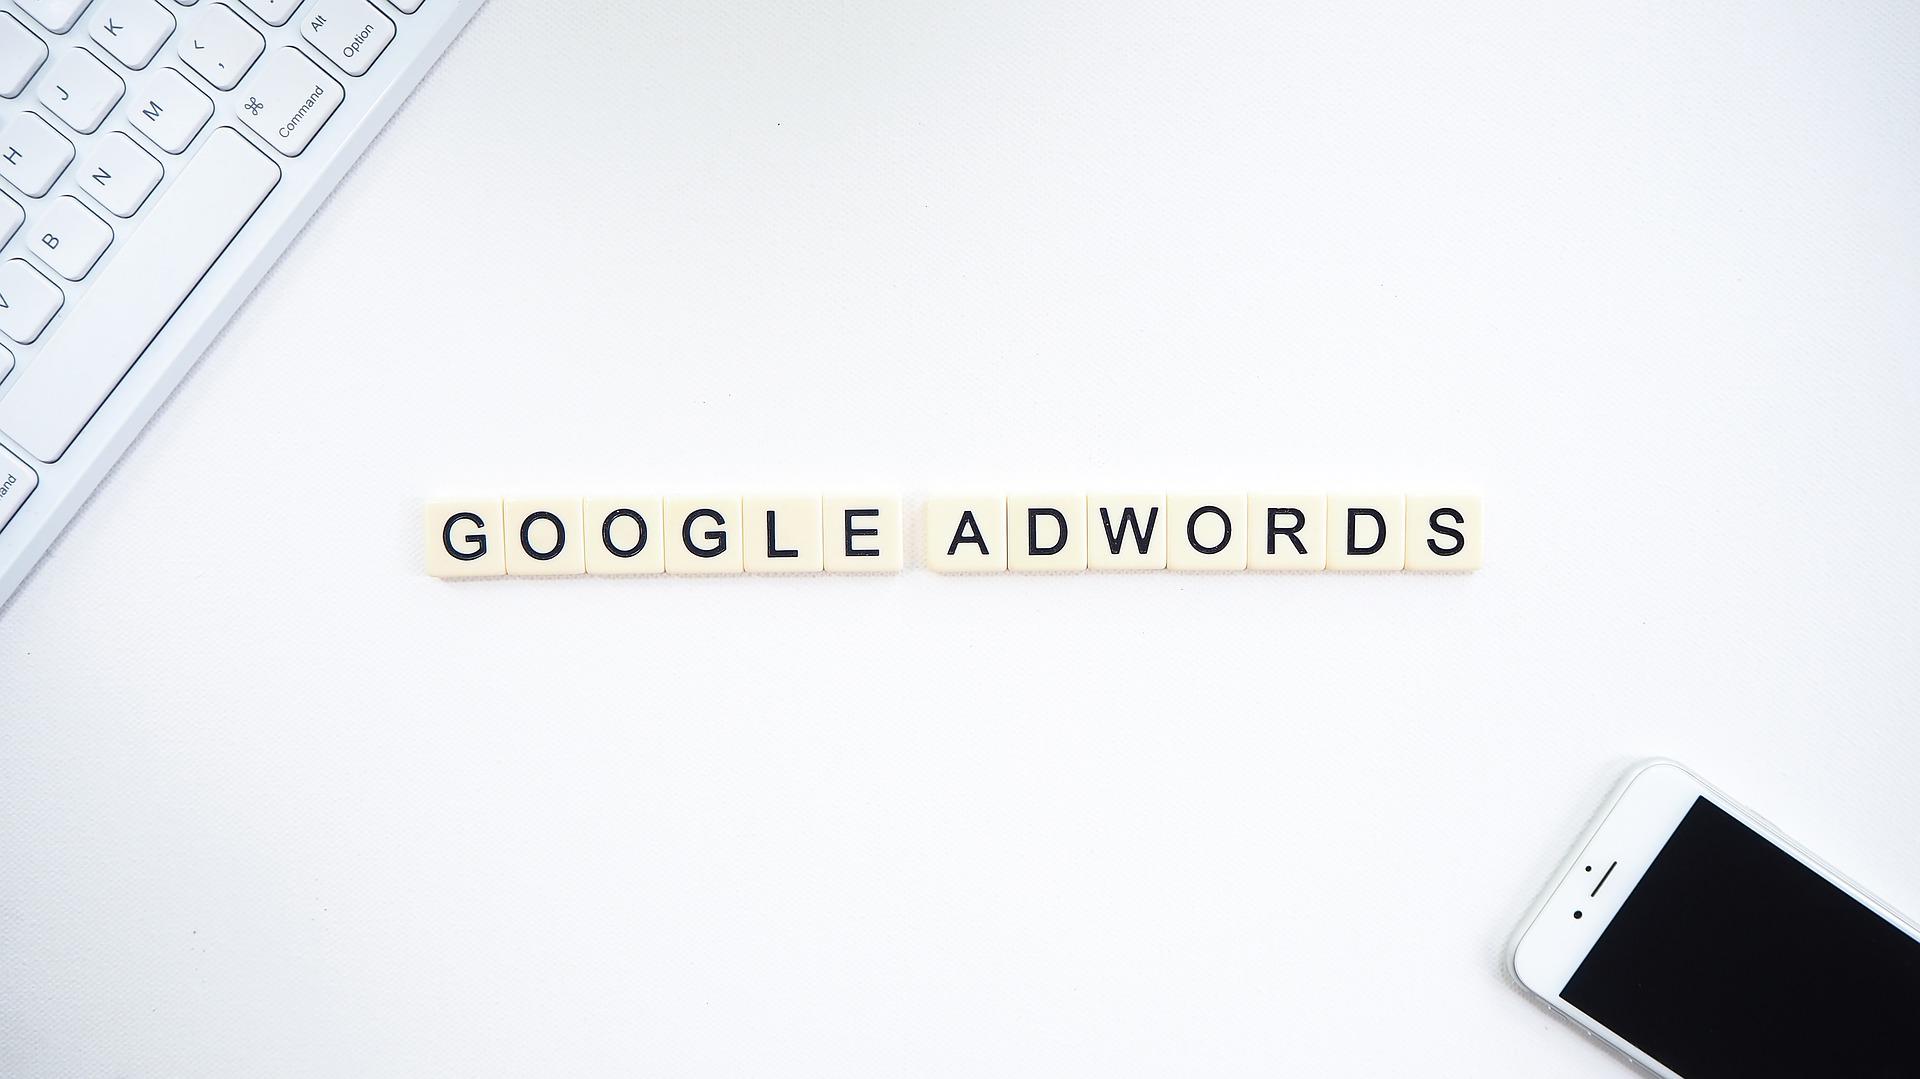 Google Adwords Meaning And How To Go About It